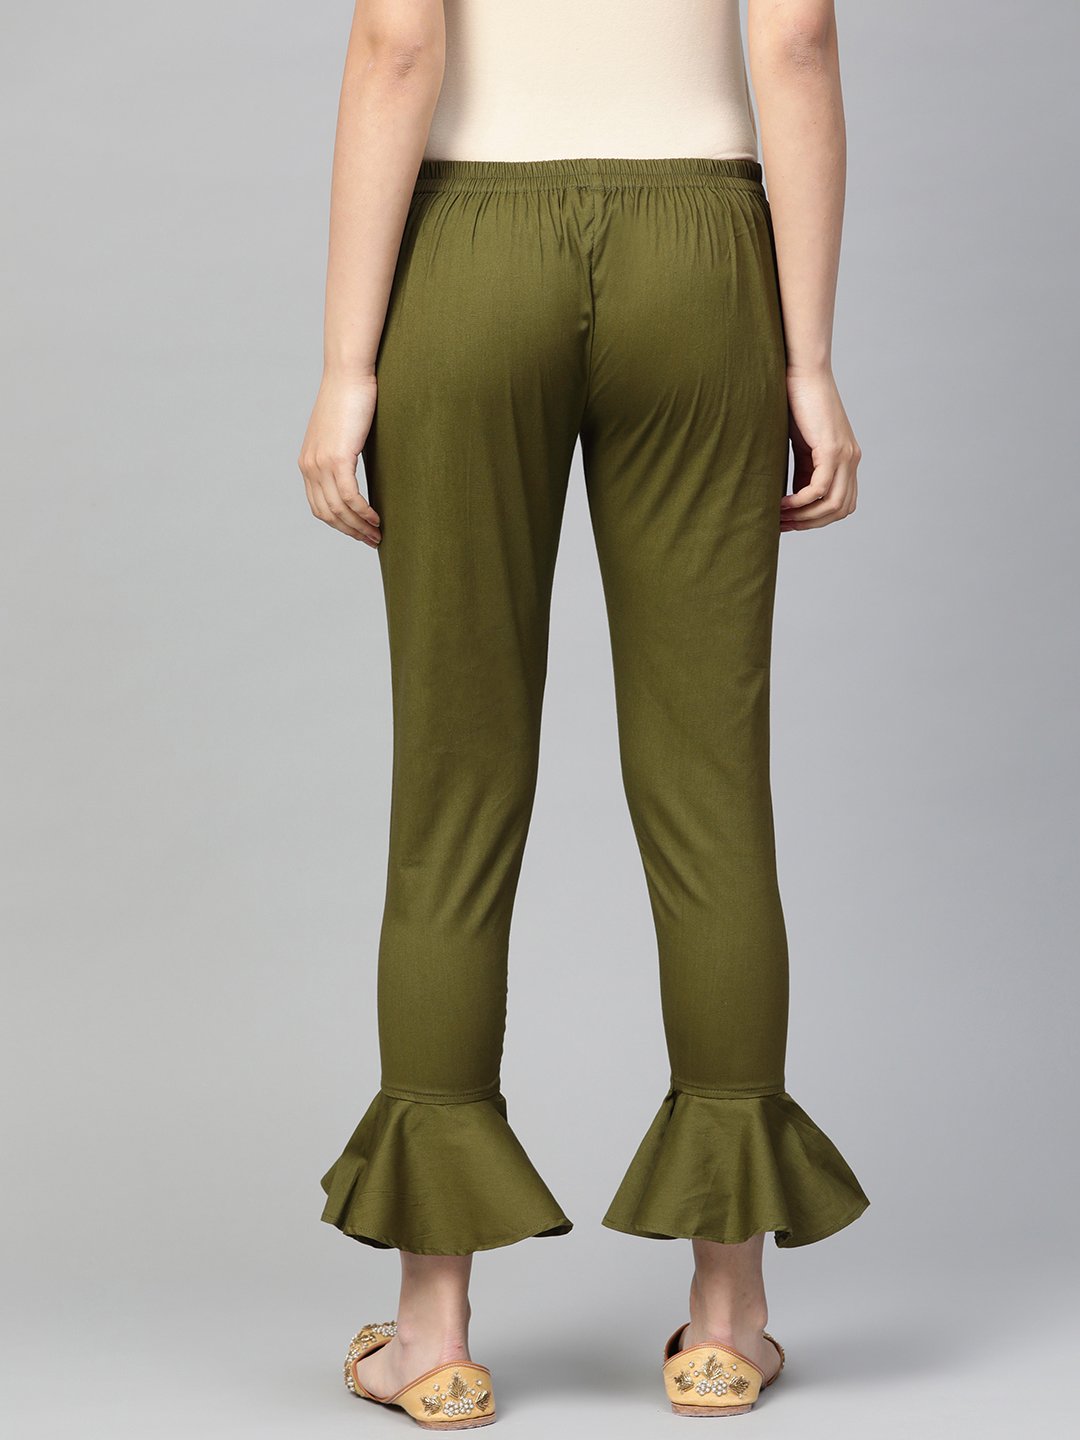 Women's Olive Green Smart Fit Solid Bottom Flared Trousers - Jompers